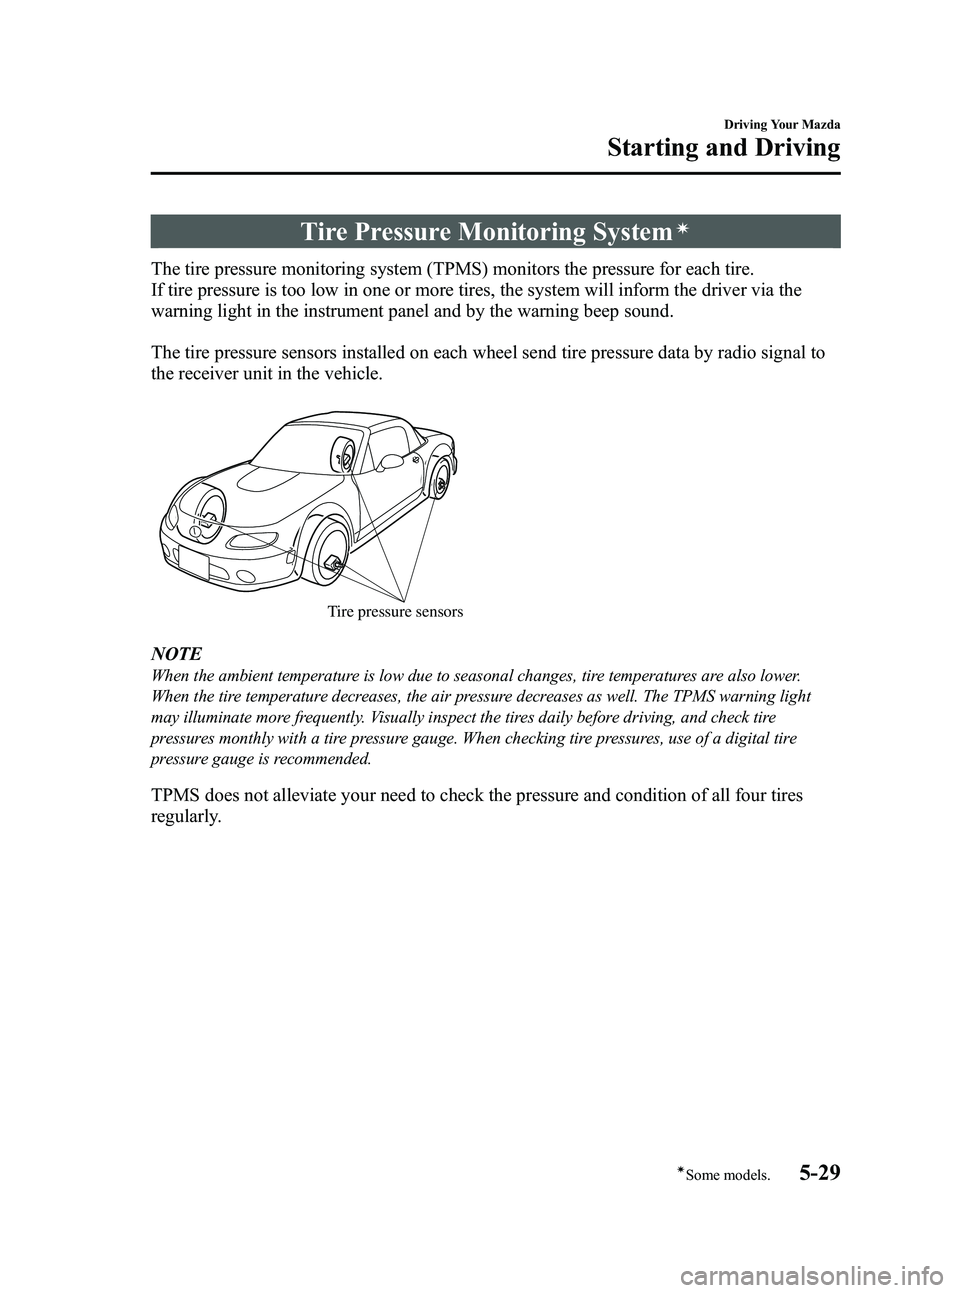 MAZDA MODEL MX-5 MIATA PRHT 2013  Owners Manual Black plate (173,1)
Tire Pressure Monitoring Systemí
The tire pressure monitoring system (TPMS) monitors the pressure for each tire.
If tire pressure is too low in one or more tires, the system will 